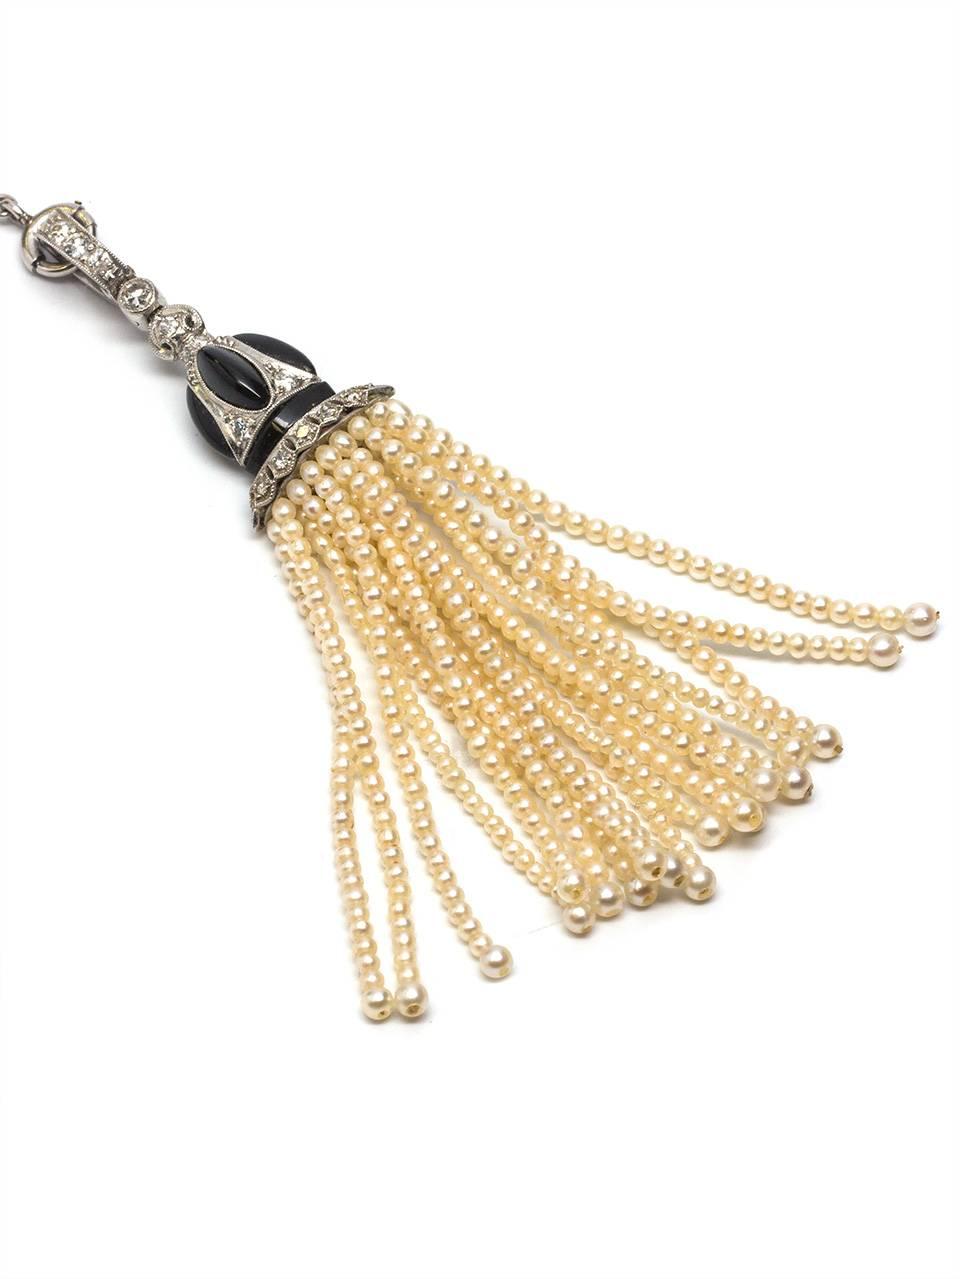 Beautifully crafted platinum chain with delicate stations of rose cut diamonds and little cultured pearls. With a detachable pearl tassle embellished with little bead set diamonds and custom cut black onyx. Stunning design. 15″ before drop. 0.80ct